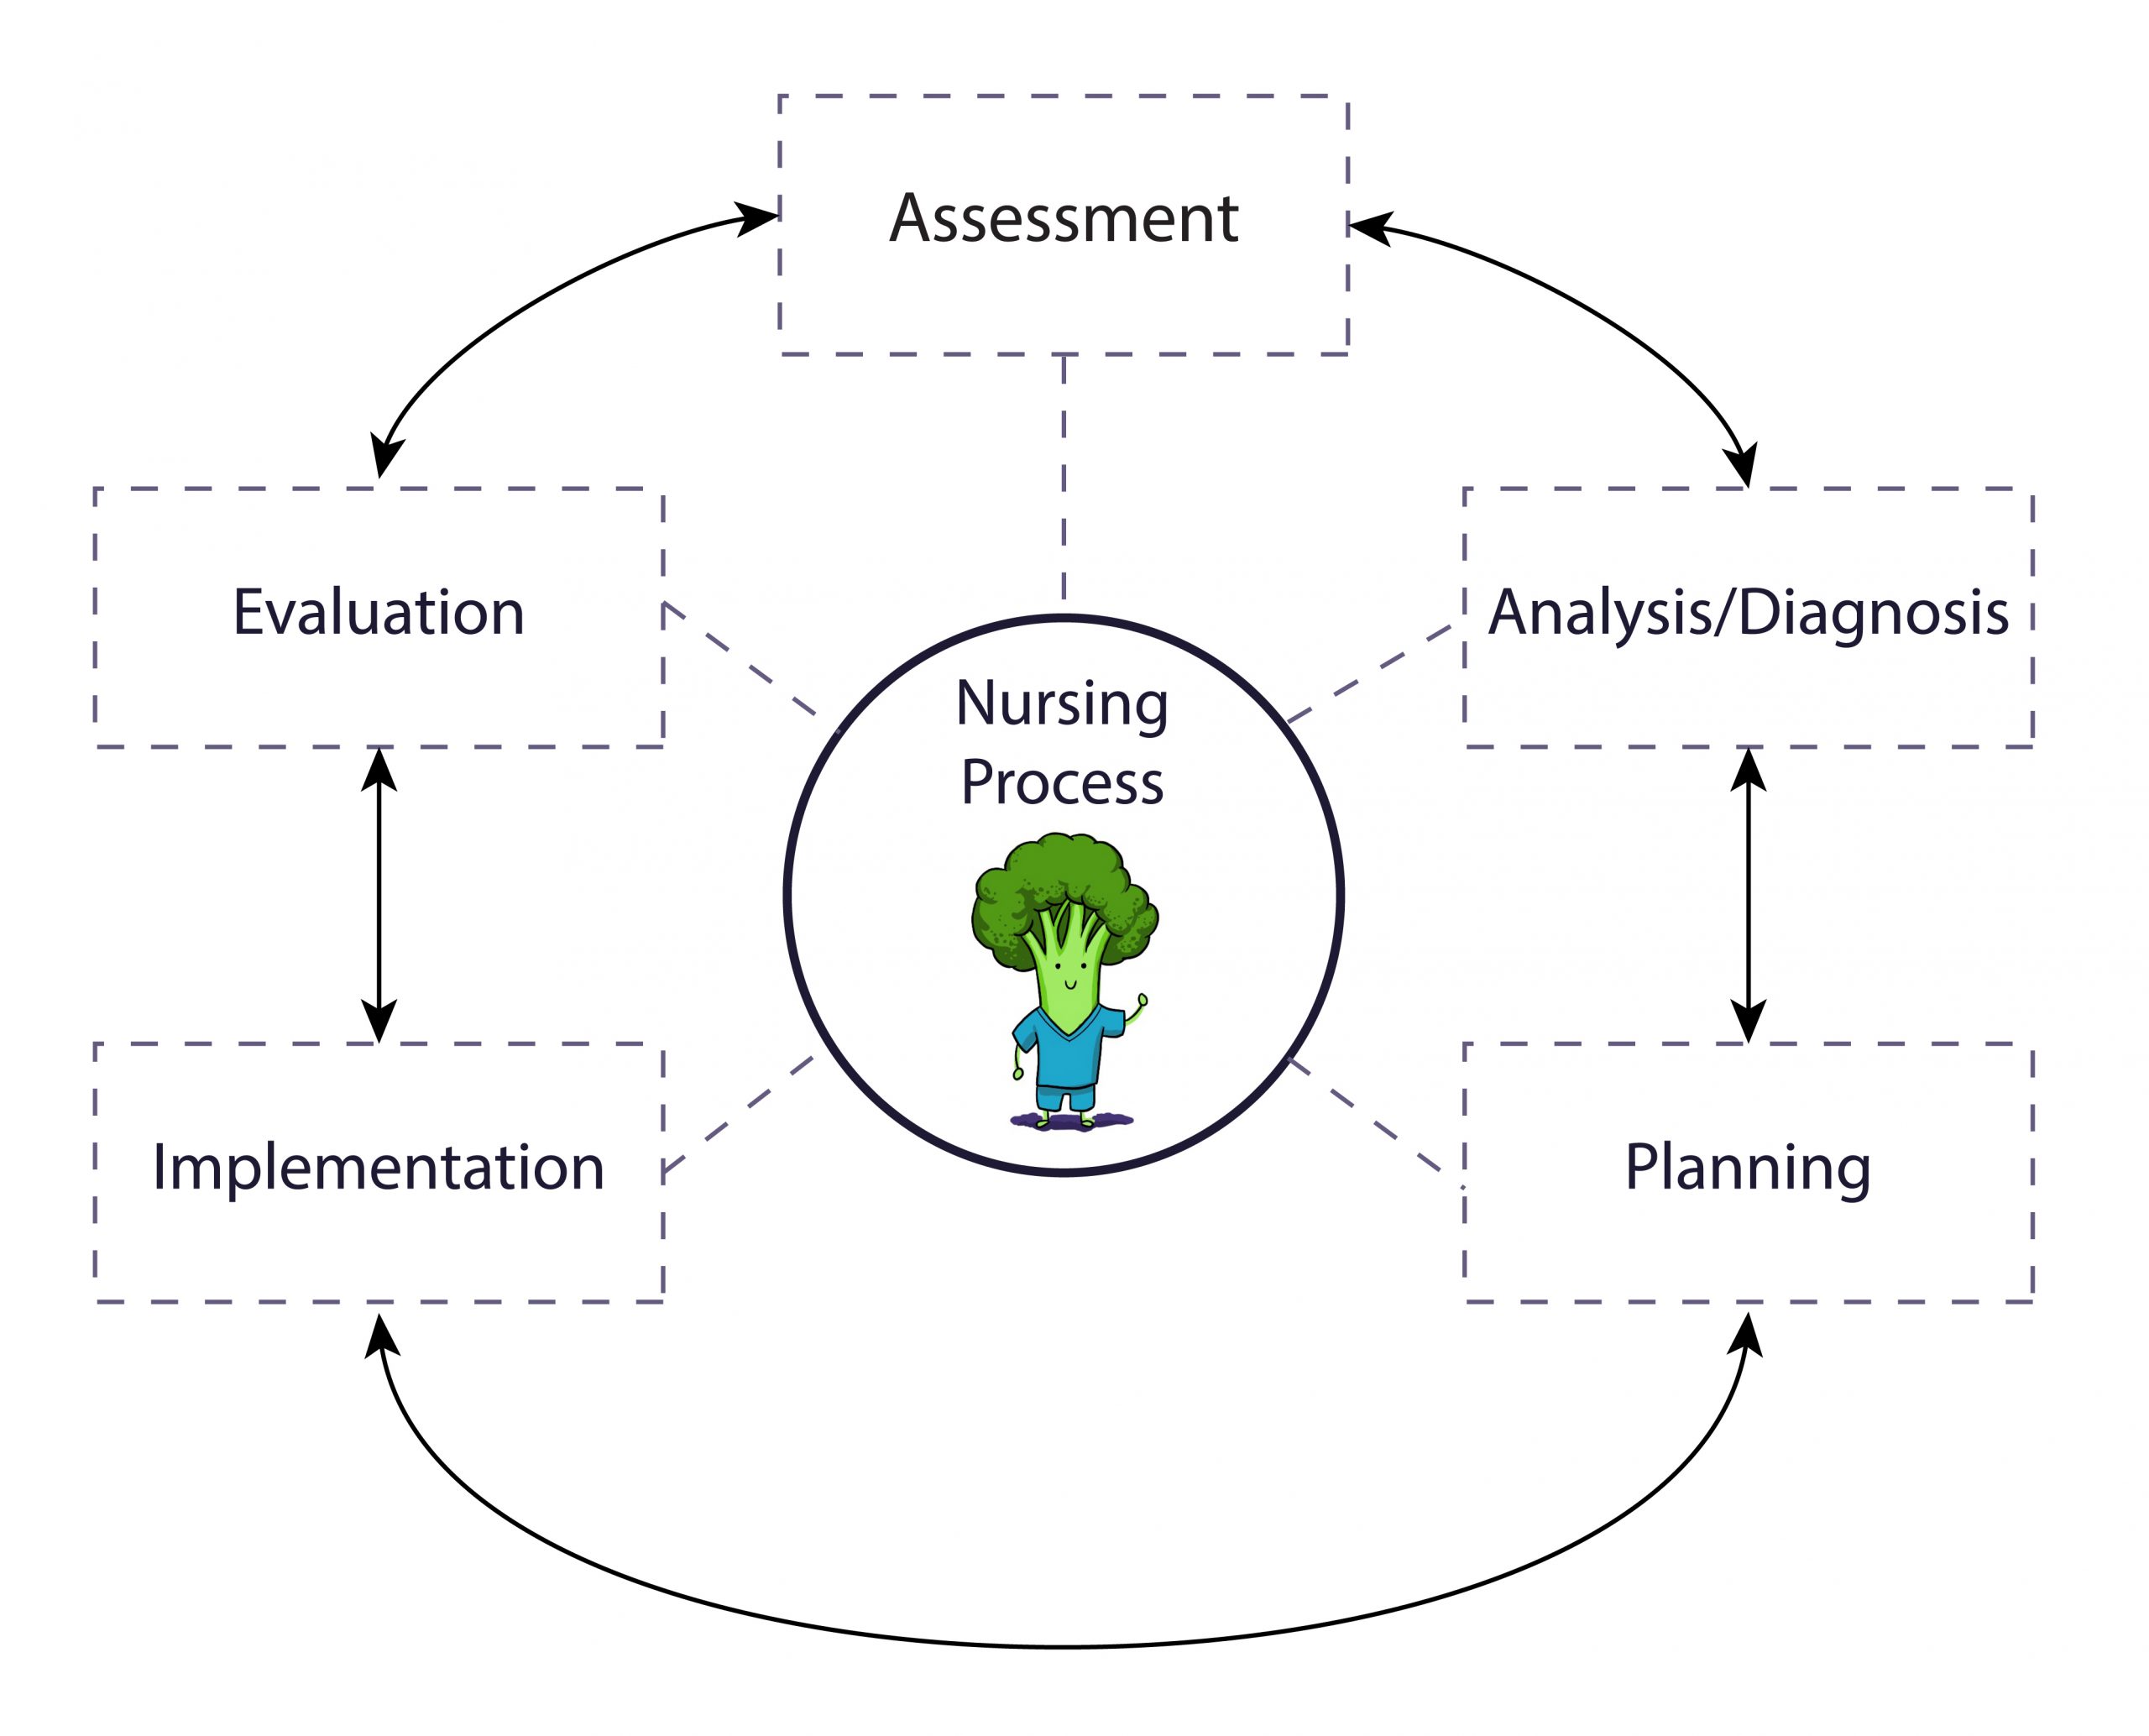 The nursing process, moving in a cycle that covers: analysis/diagnosis, planning, implementation, evaluation, and assessment